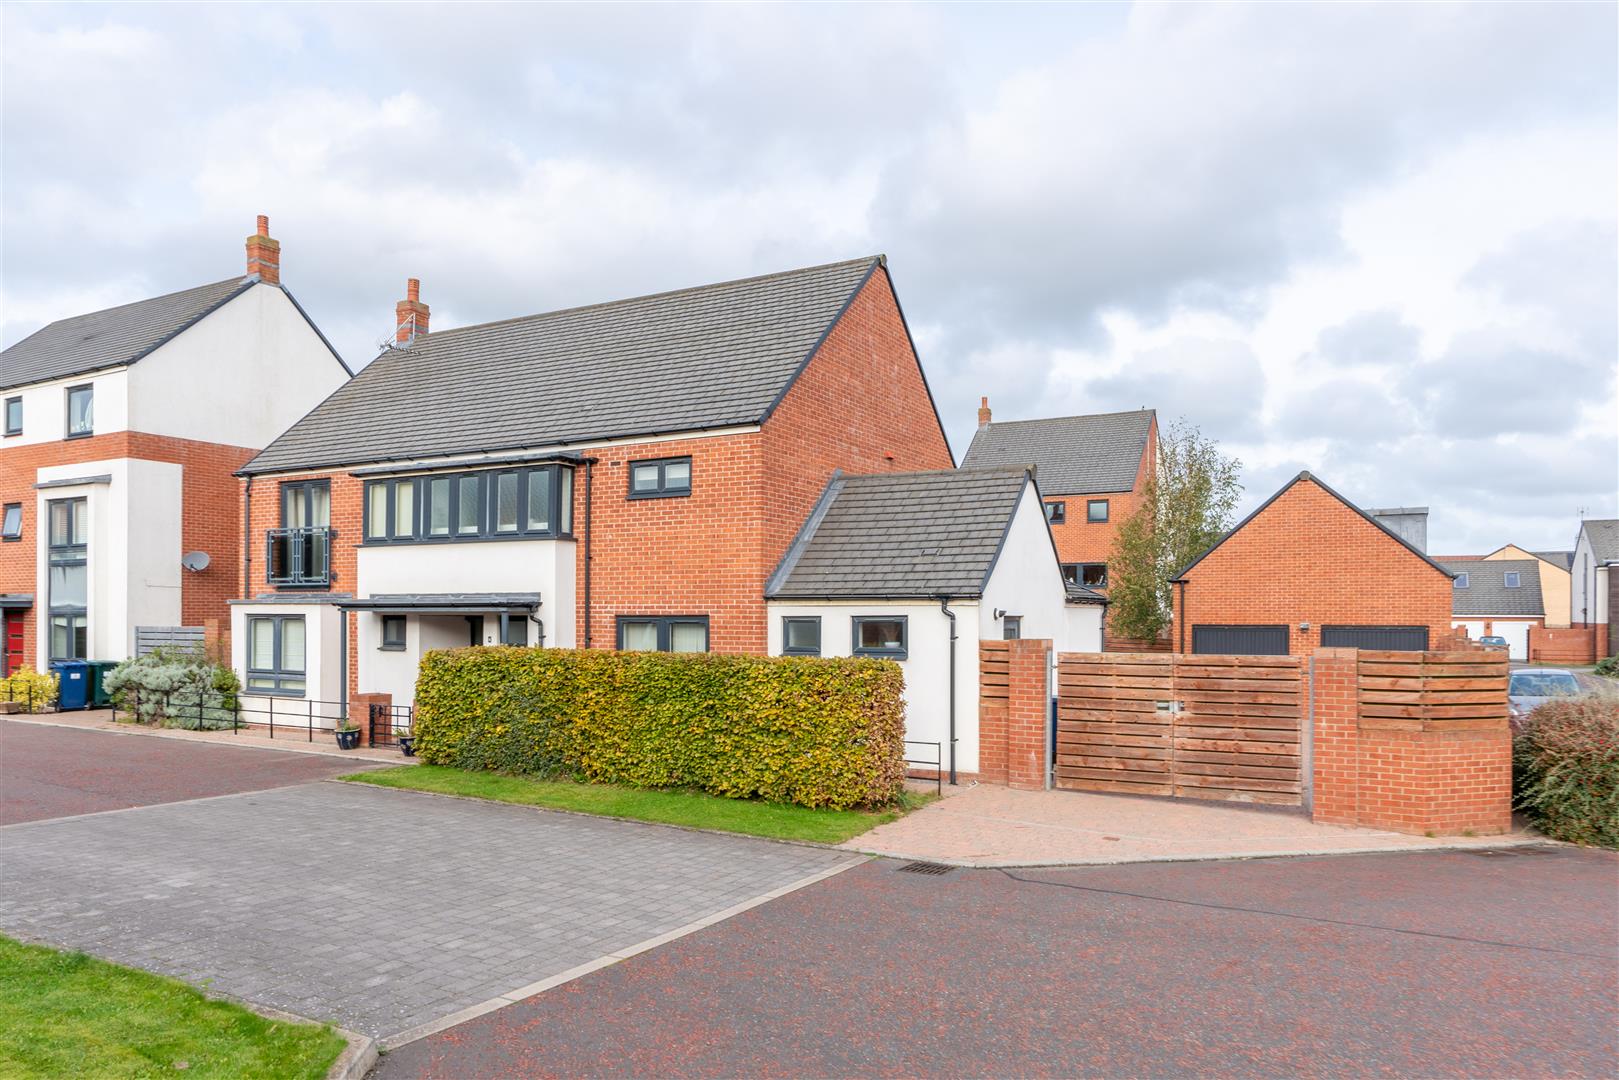 4 bed detached house to rent in Learmouth Way, Great Park - Property Image 1